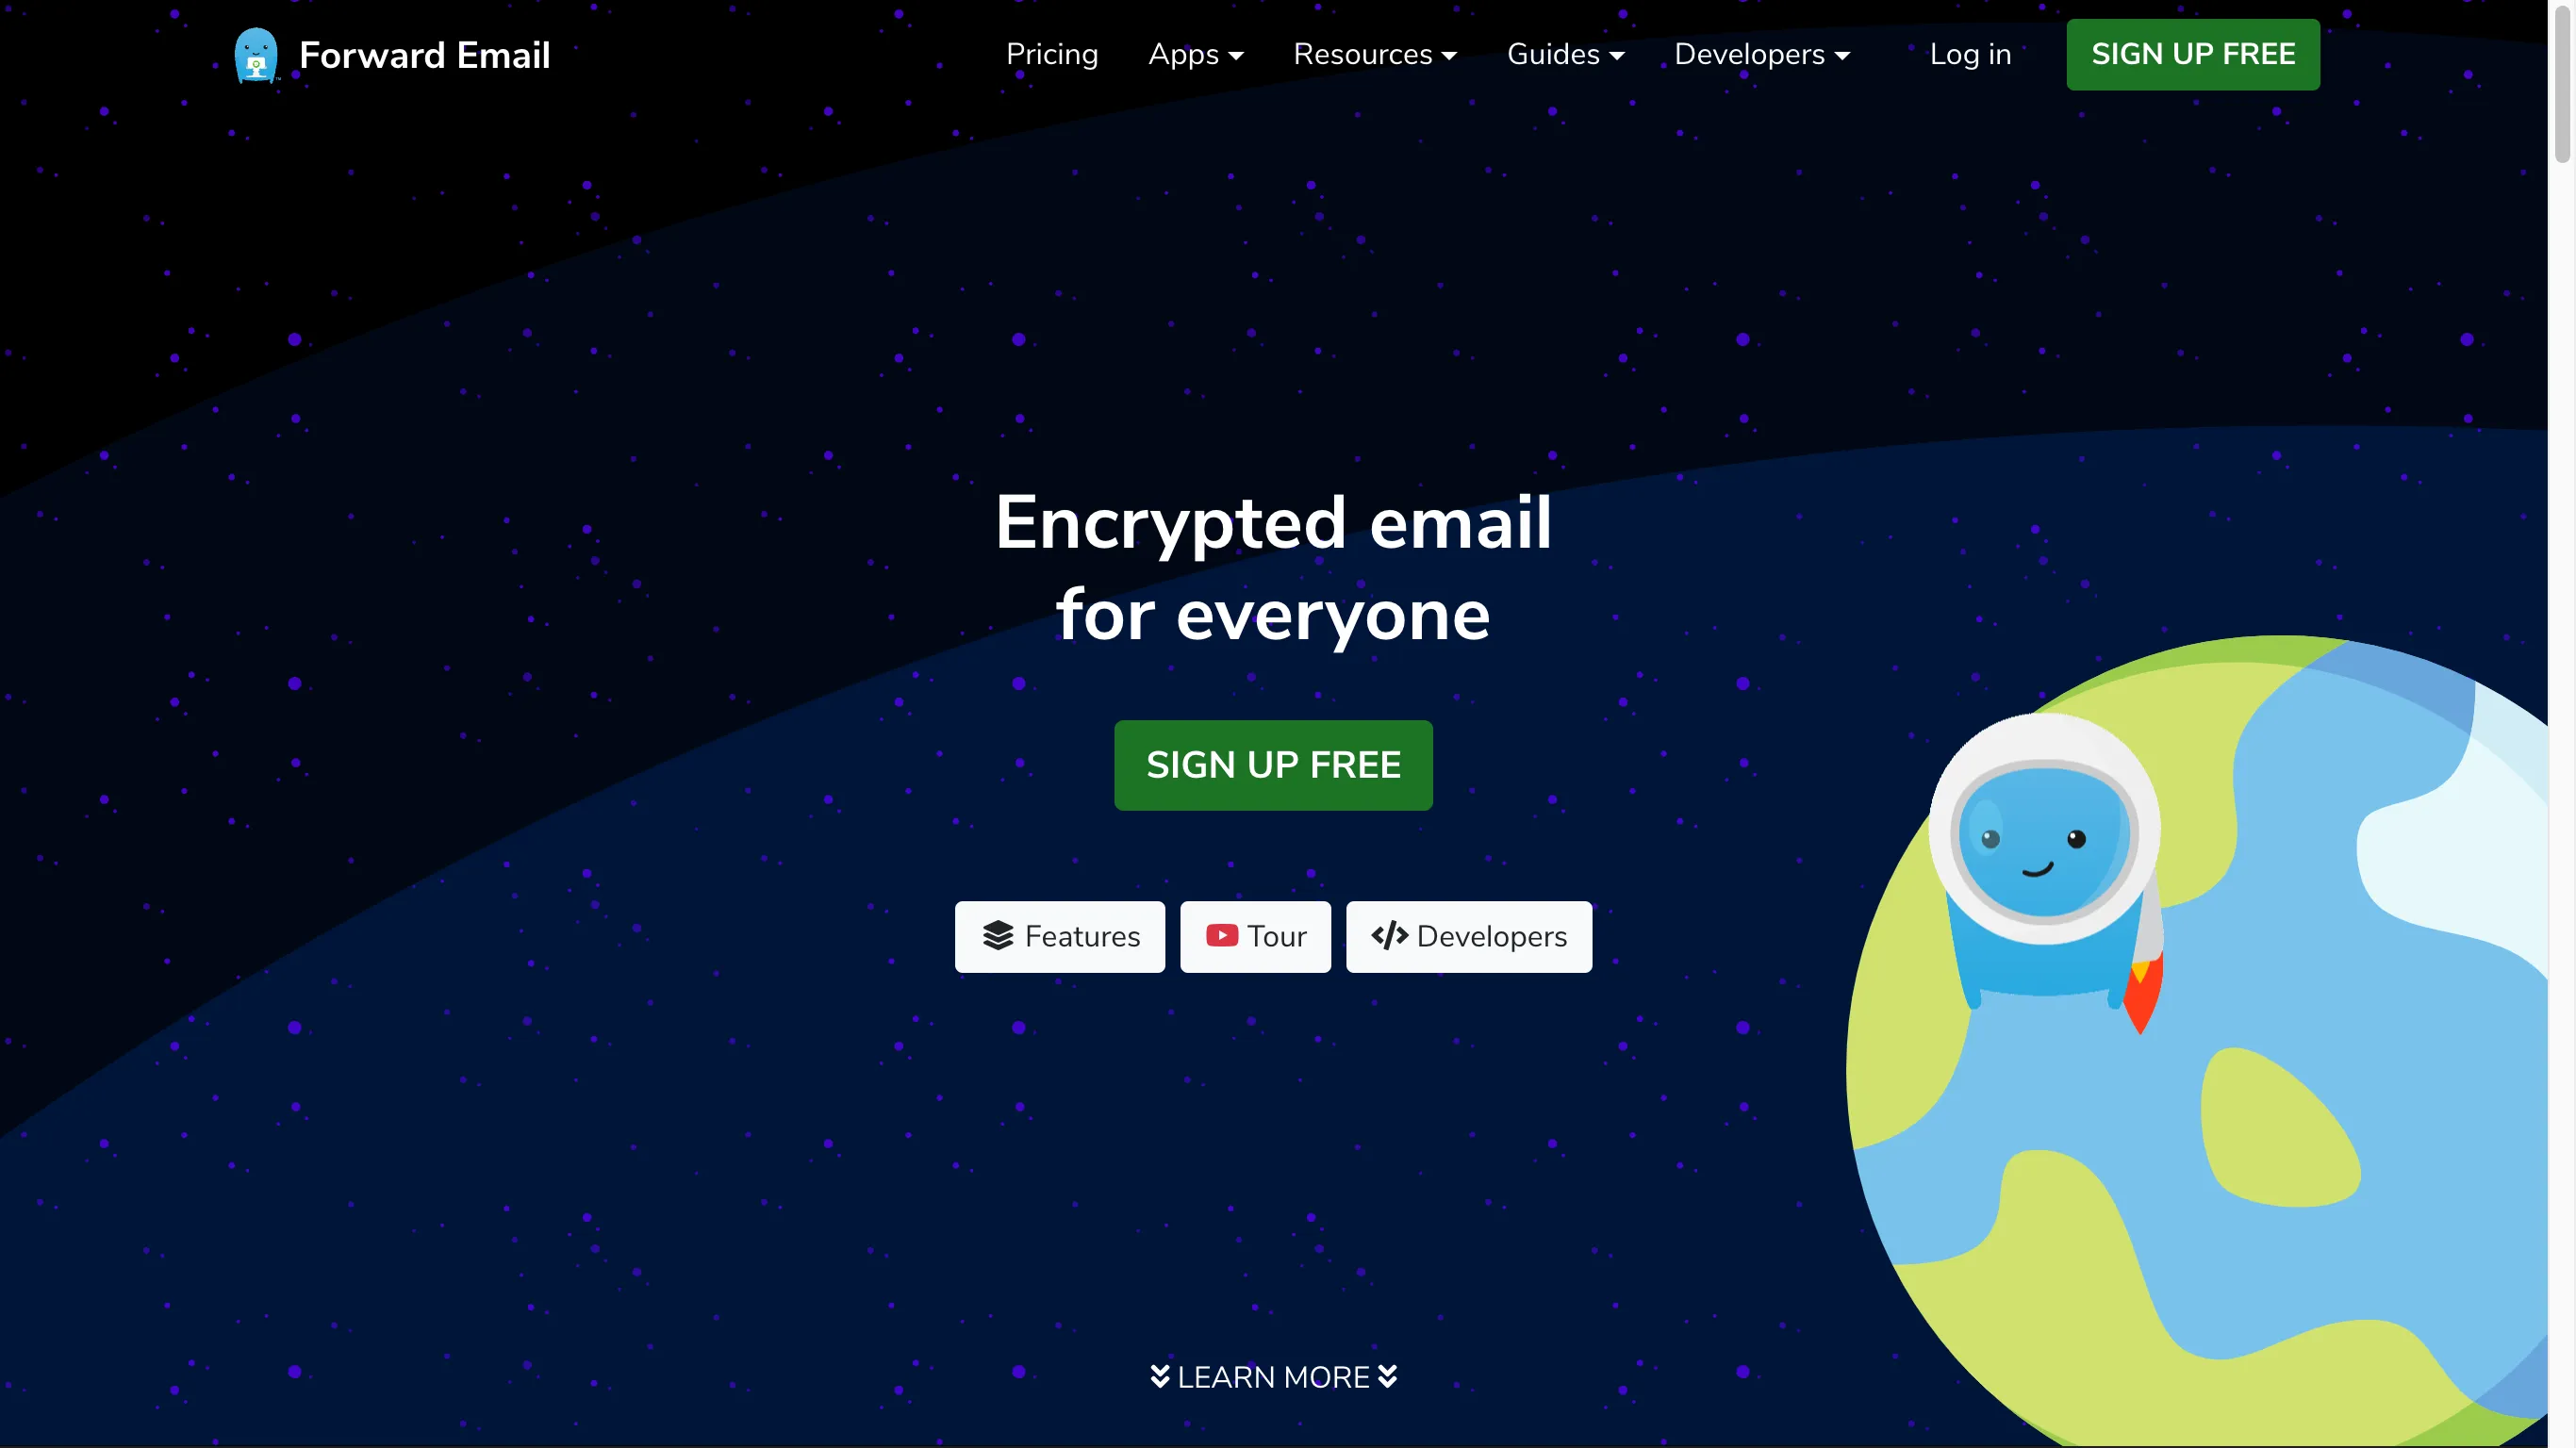 Forward Email is an open-source email service.